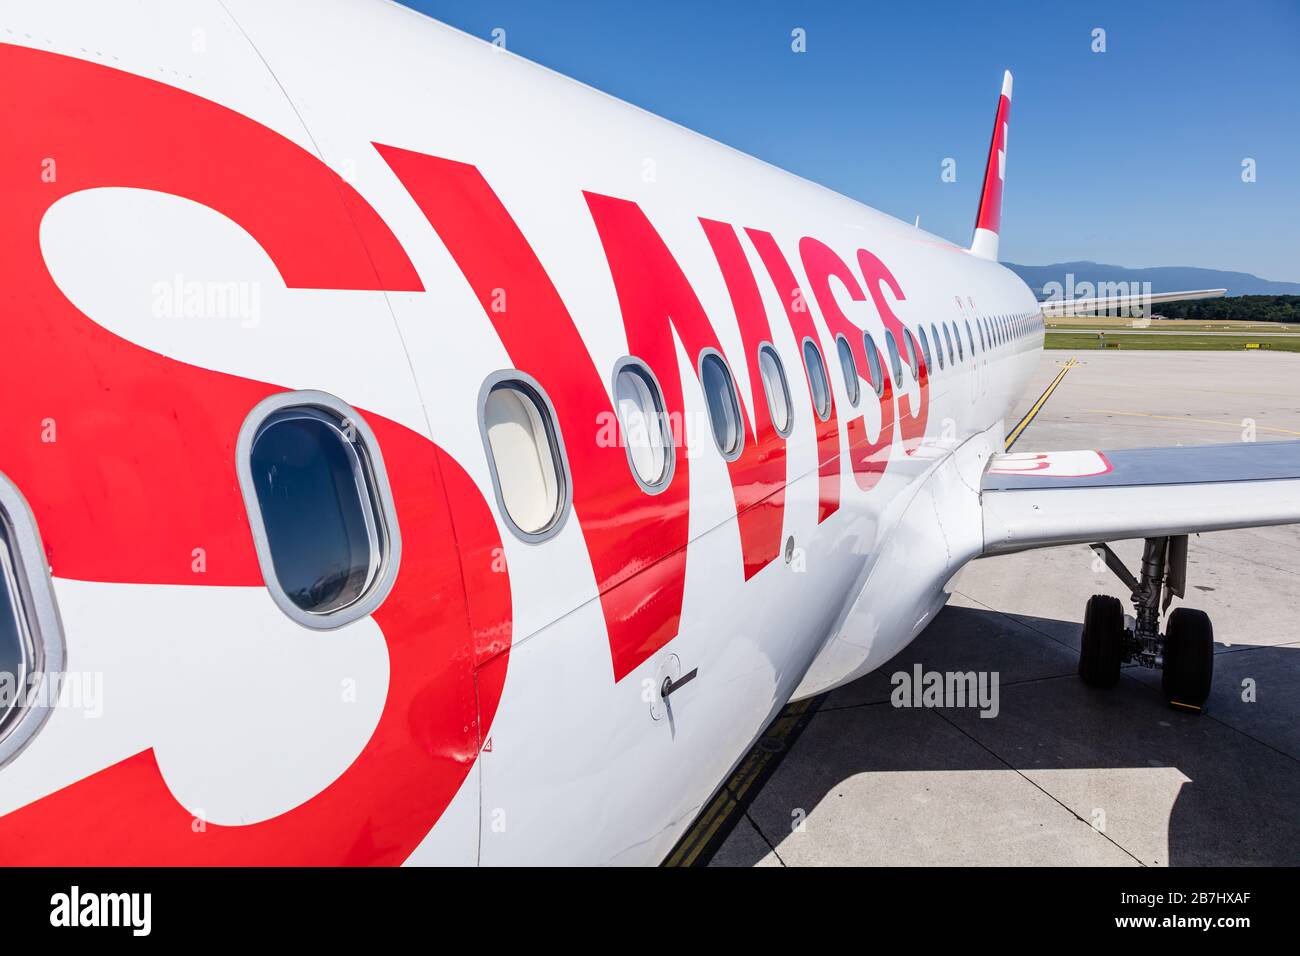 Swiss airline aircraft on the runway Stock Photo